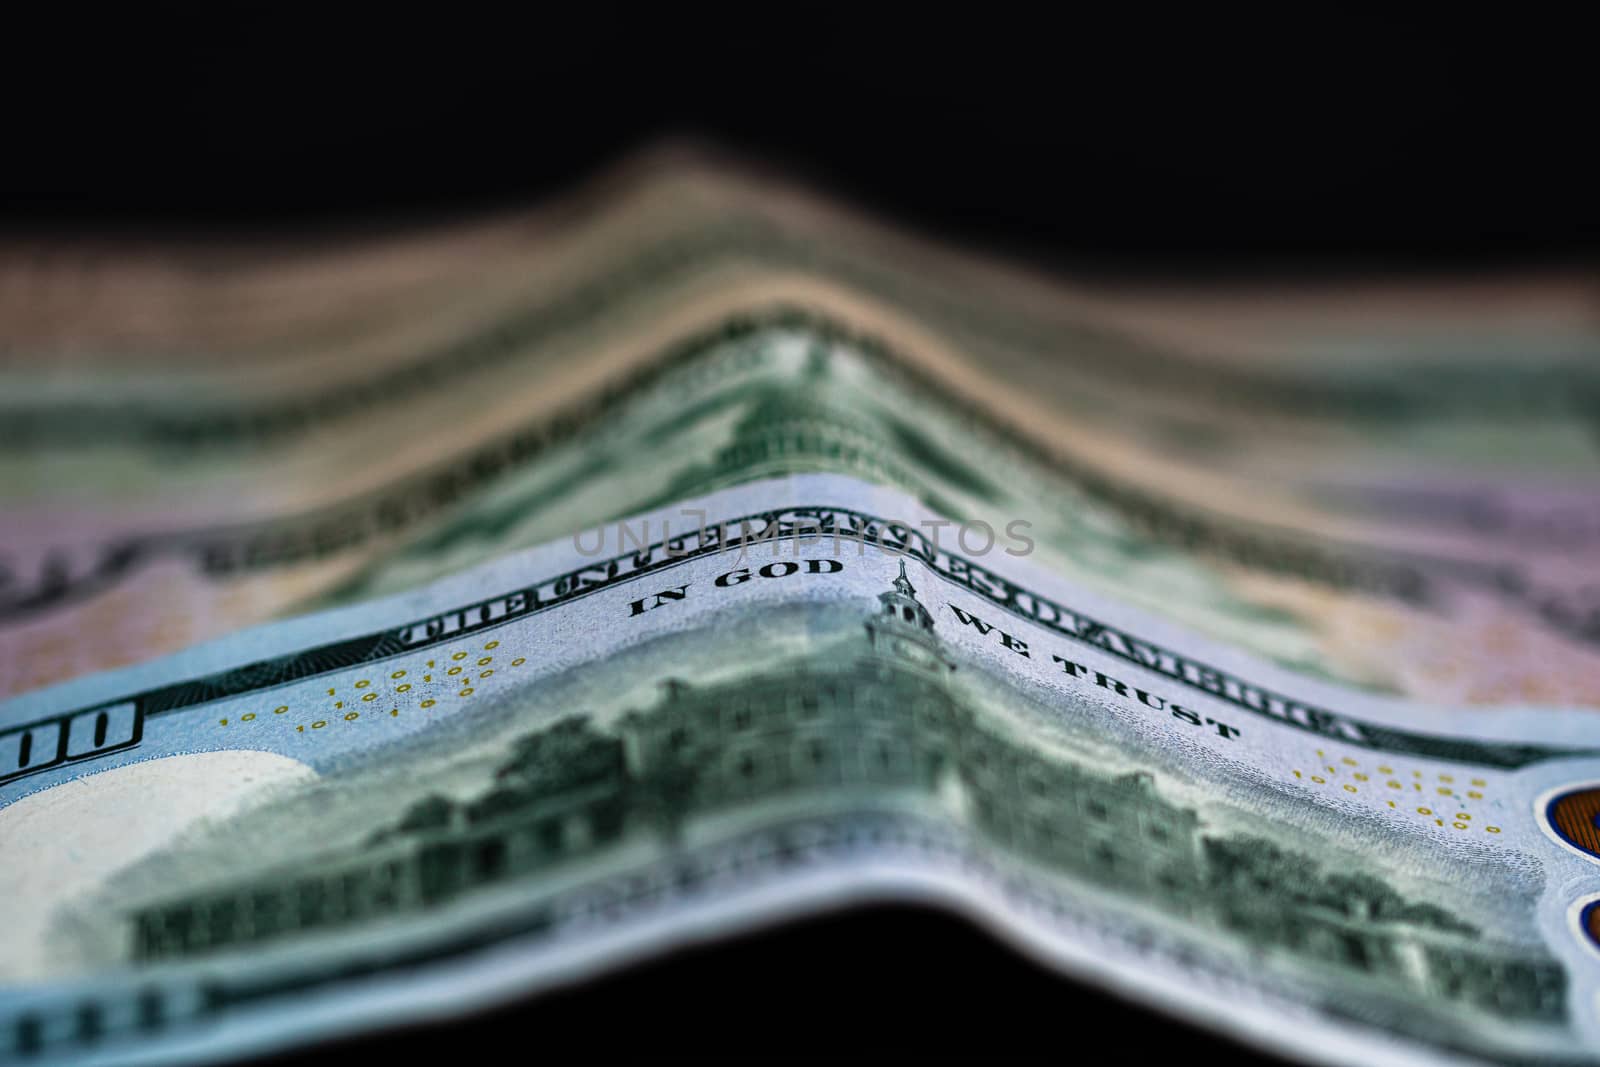 Selective focus on detail of dollars banknotes. Close up macro detail of money banknotes, dollars isolated. World money concept, inflation and economy concept